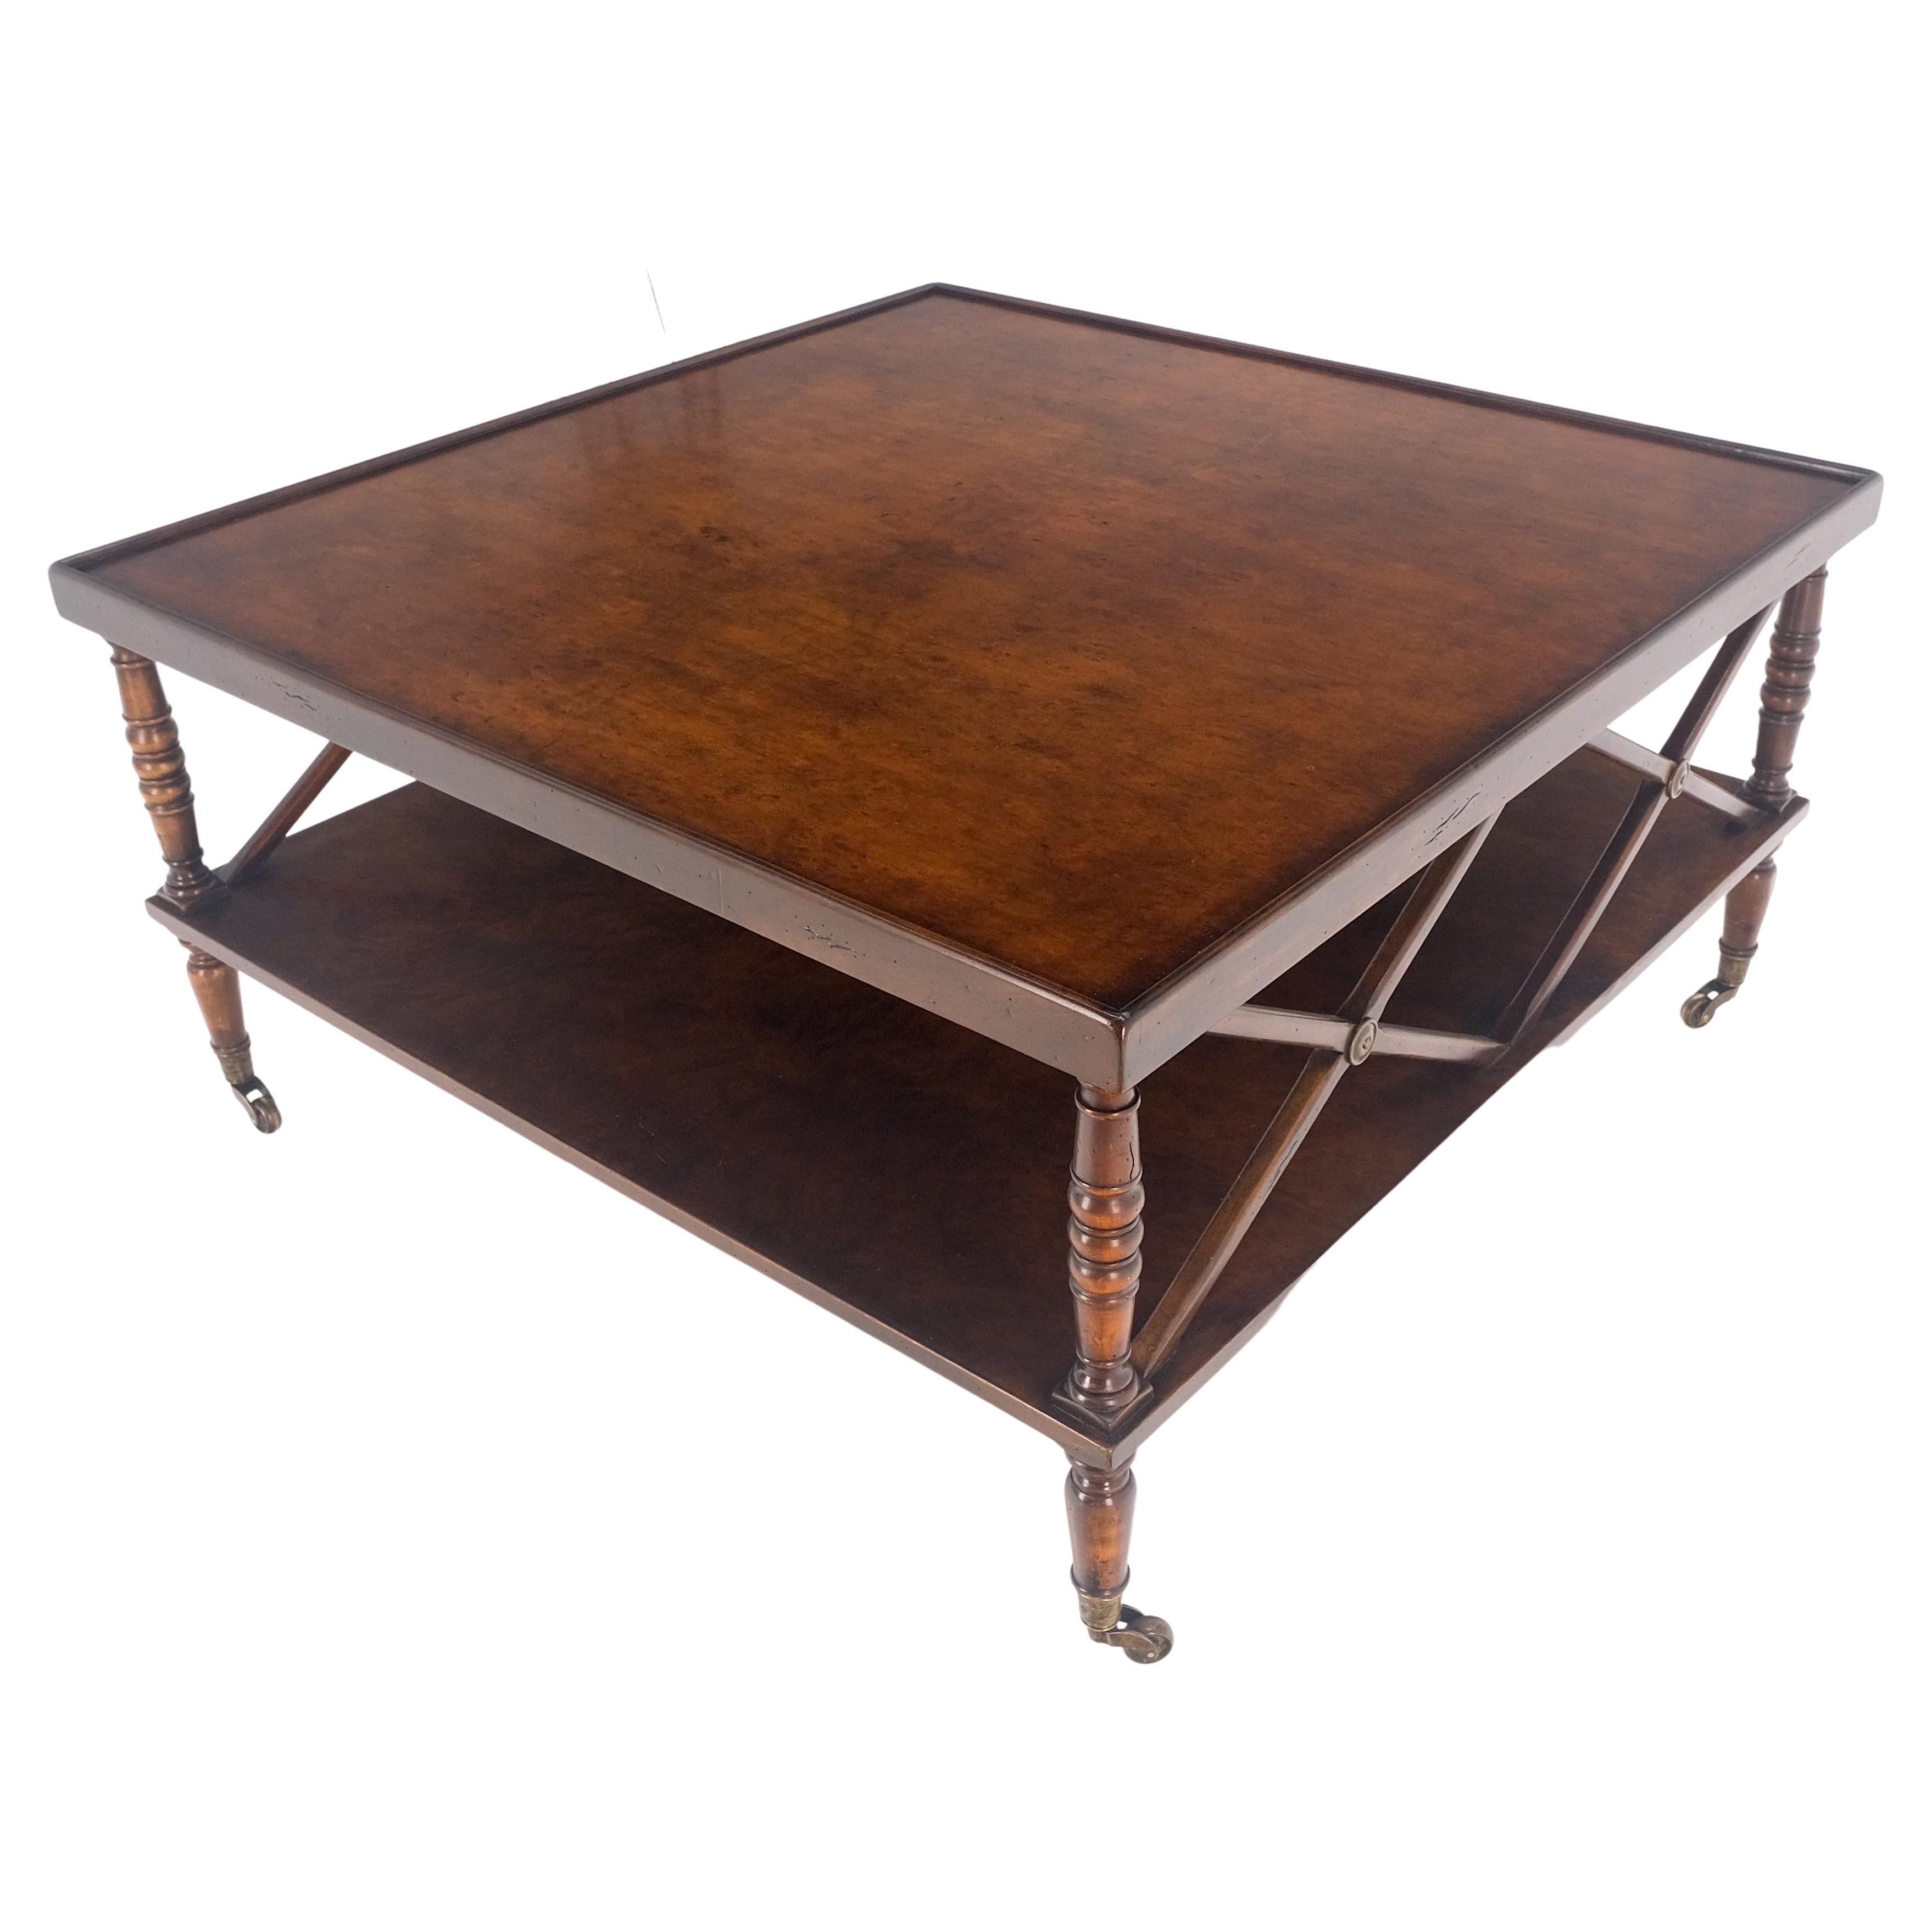 Large Honey Dark Amber Brown Burl Walnut Square Two Tier Coffee Table Wheel MINT For Sale